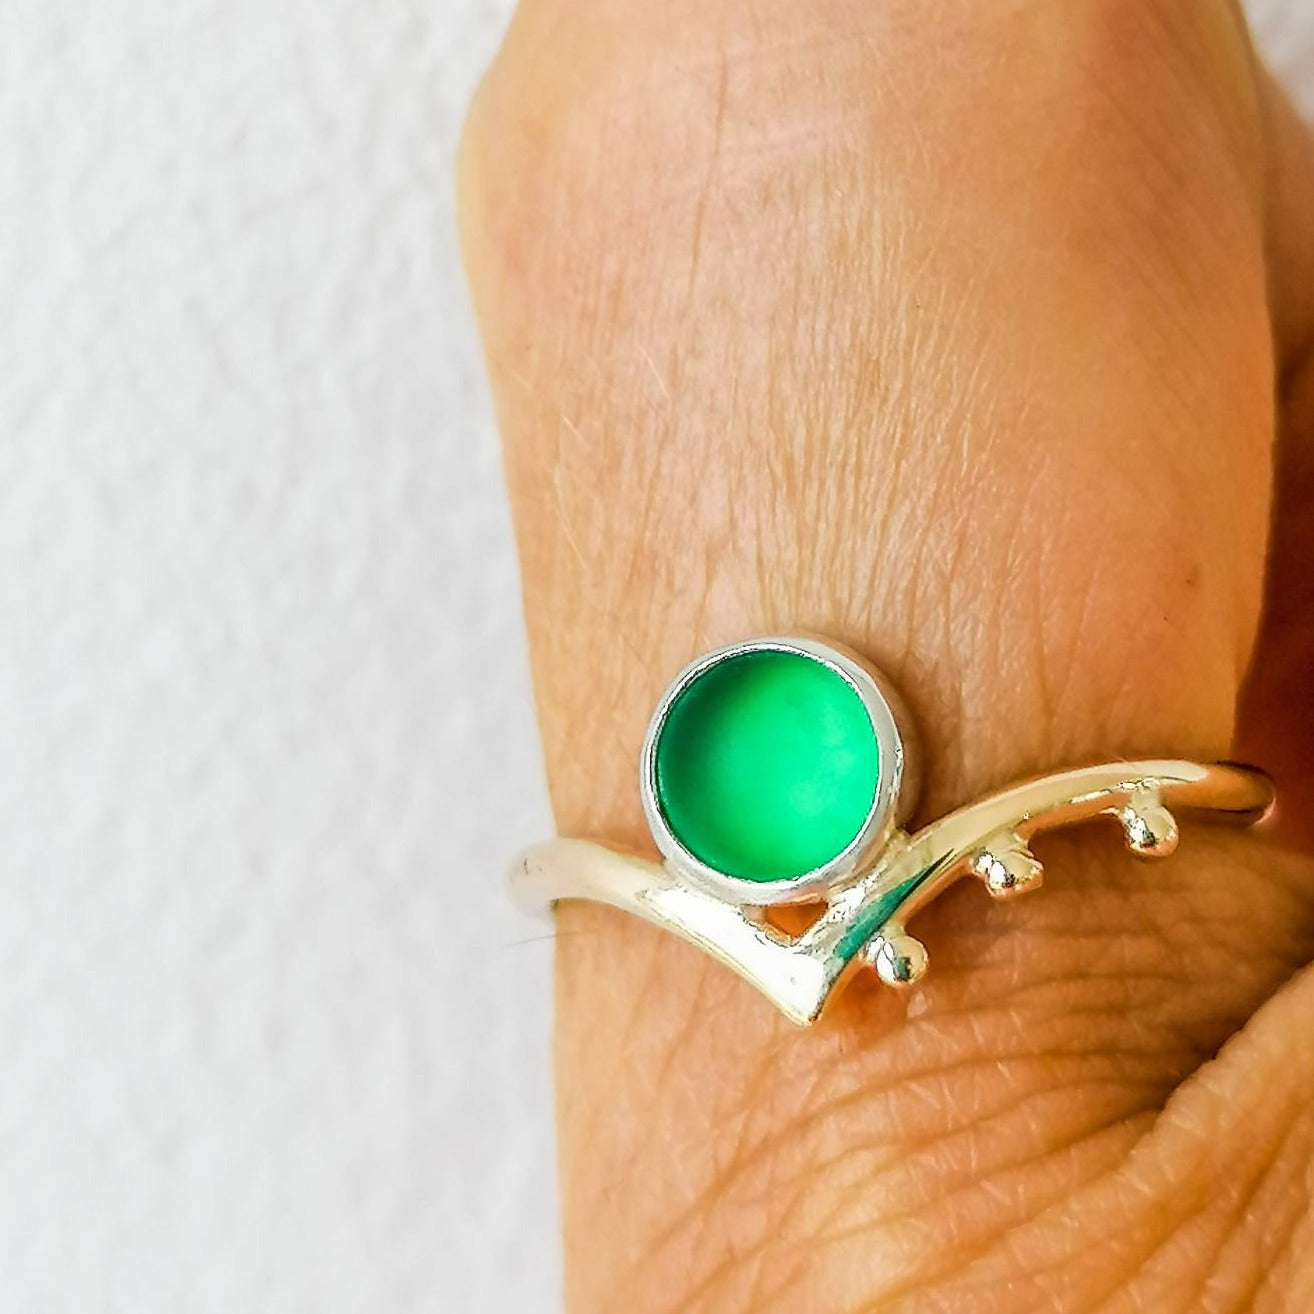 9 Carat Yellow Gold Green Sea Glass Ring - ALLURE Collection by Booblinka Jewellery